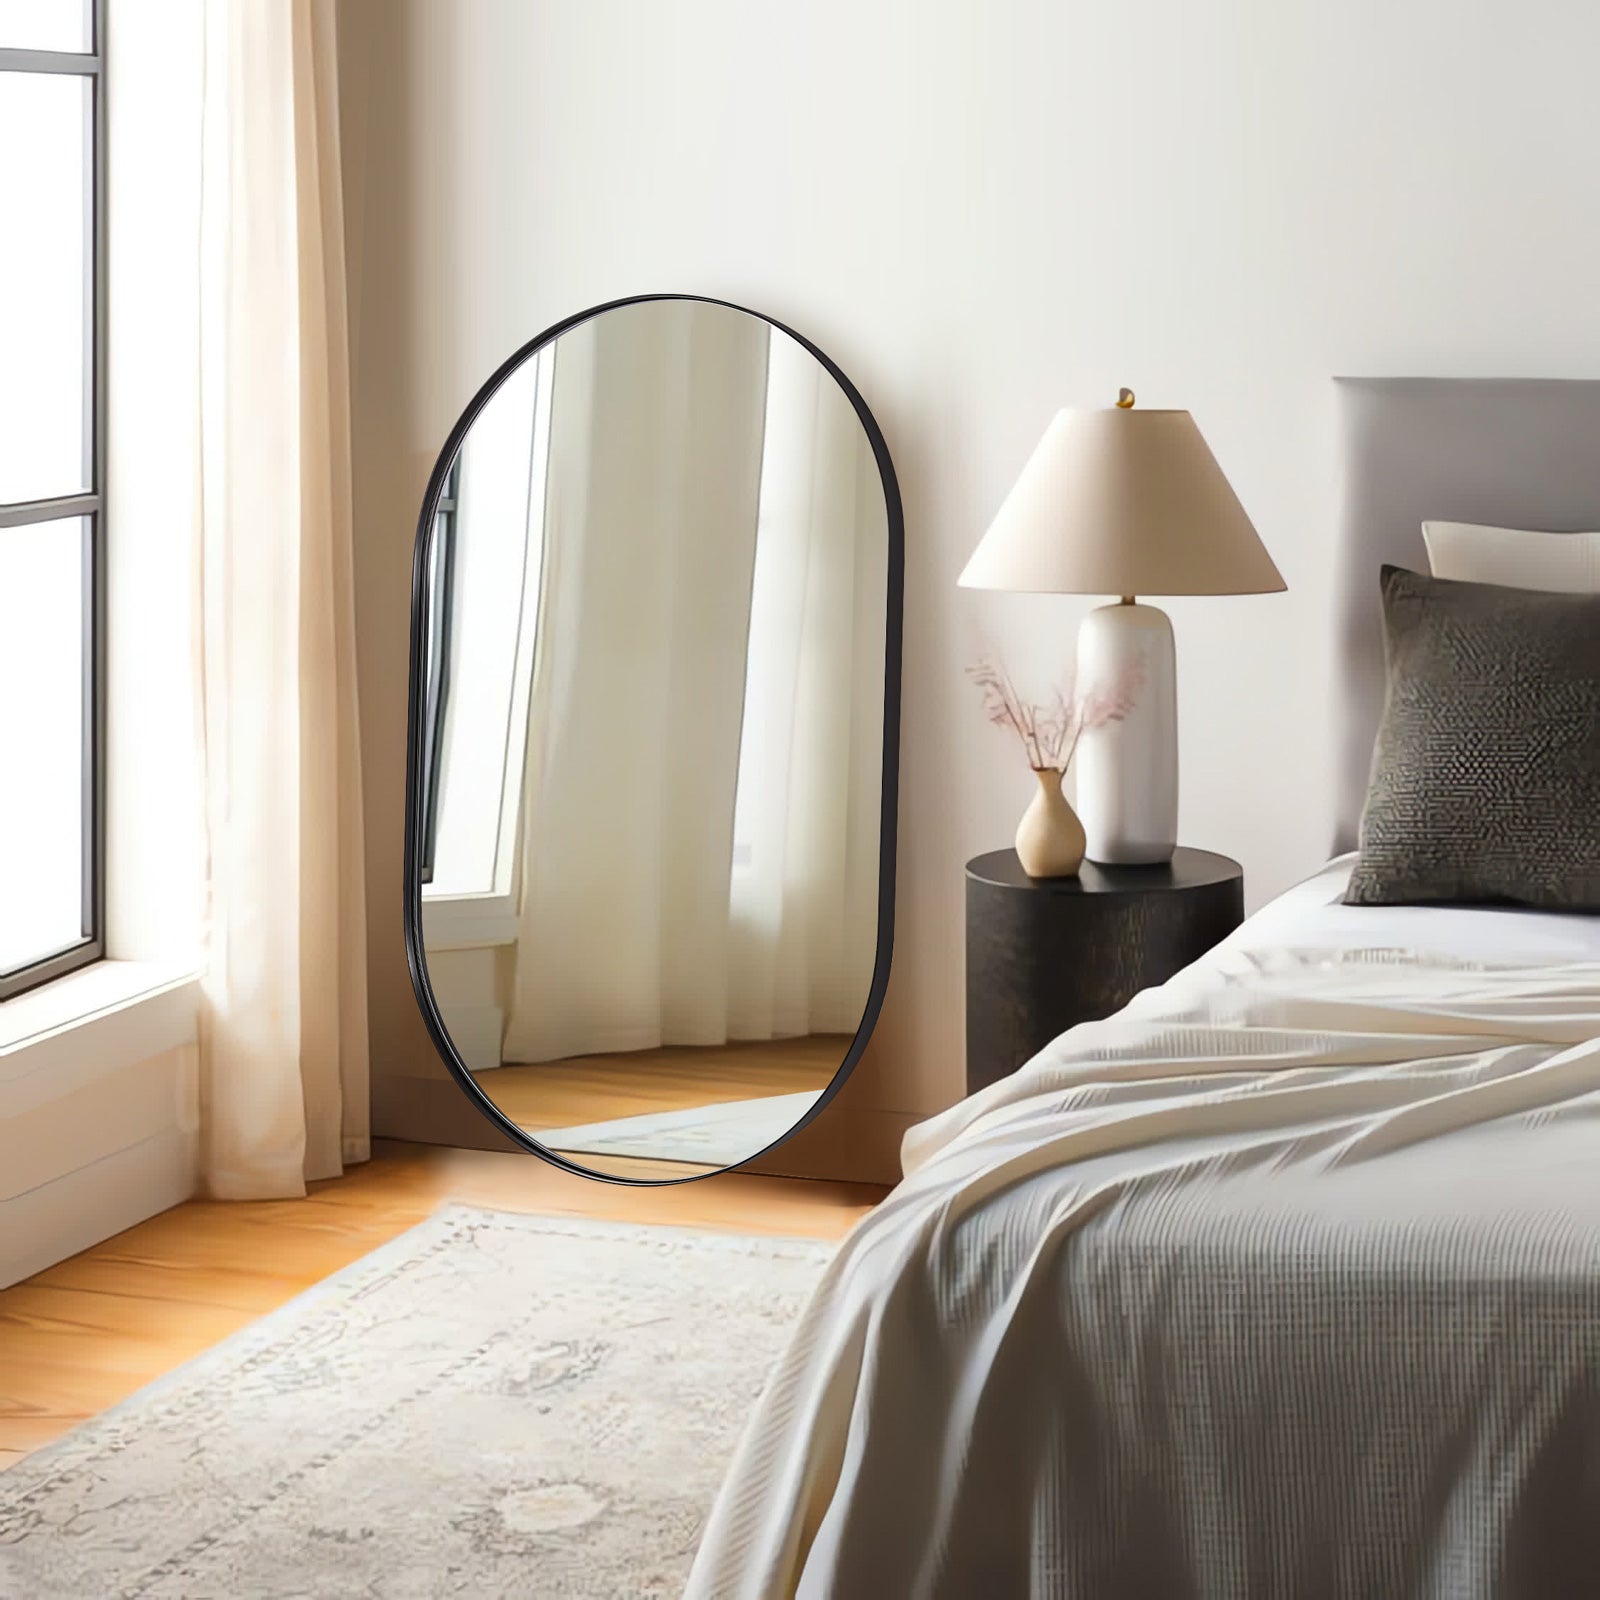 Full Length Pill Shaped Mirrors Wall Mounted, Full Body Long Leaning Mirror